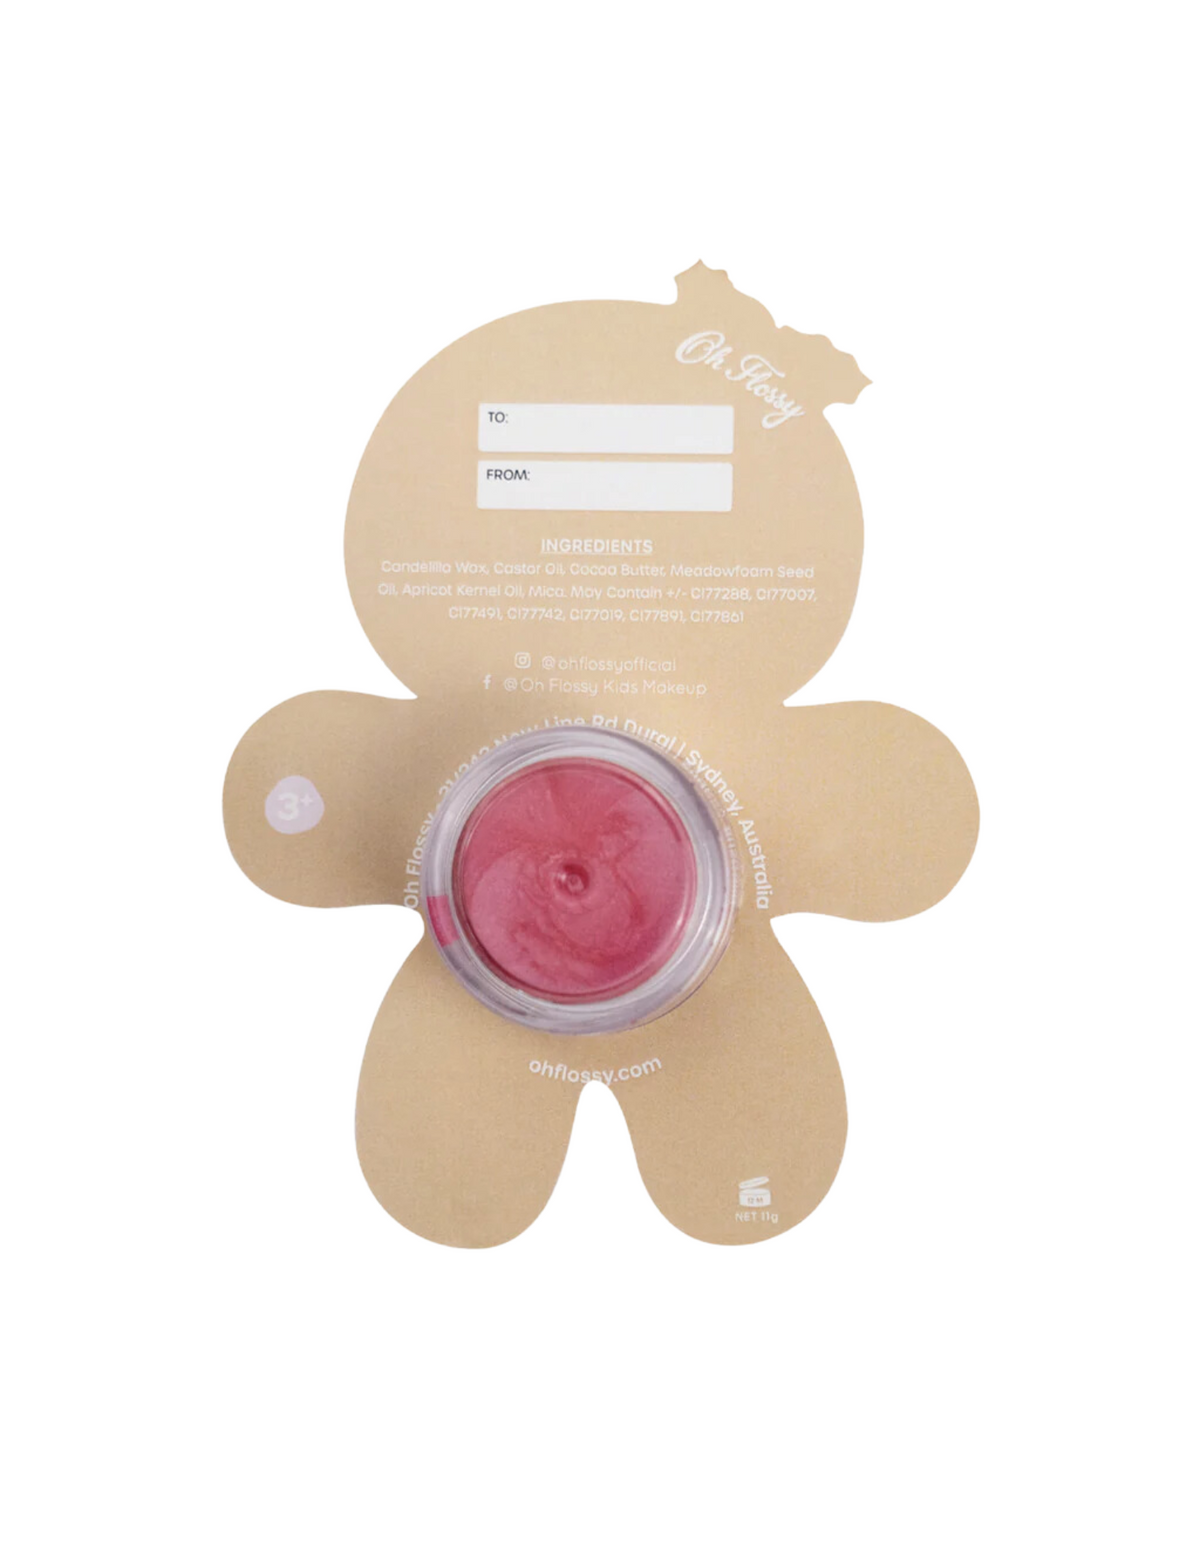 Xmas - Lipstick Gingerbread Girl - Oh Flossy